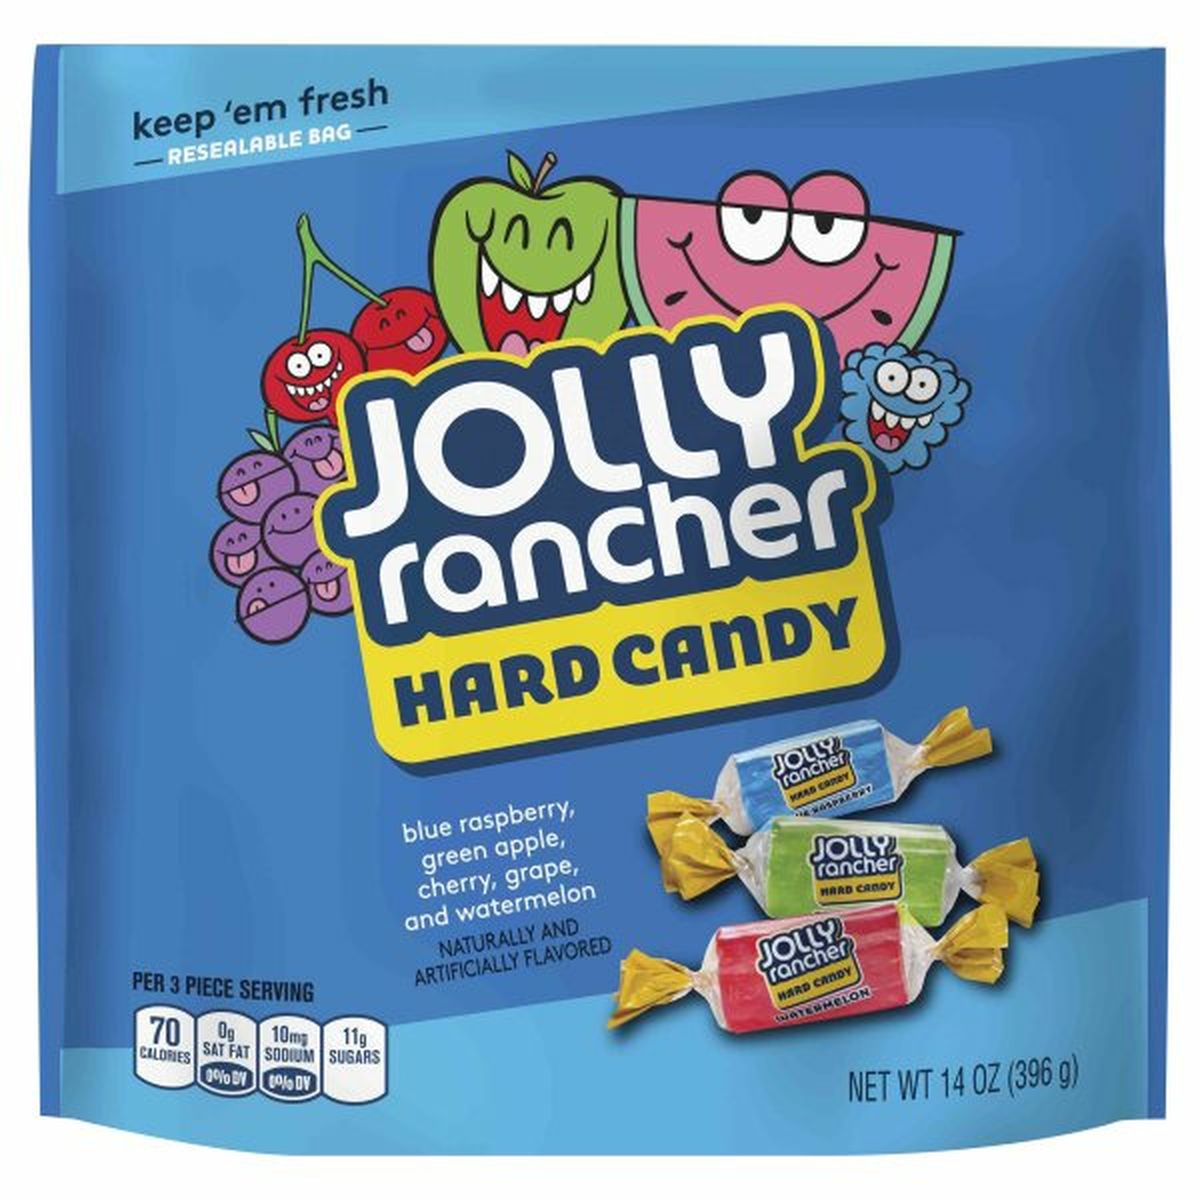 Calories in Jolly Ranchers Hard Candy, Watermelon, Green Apple, Cherry, Grape, and Blue Raspberry Flavors